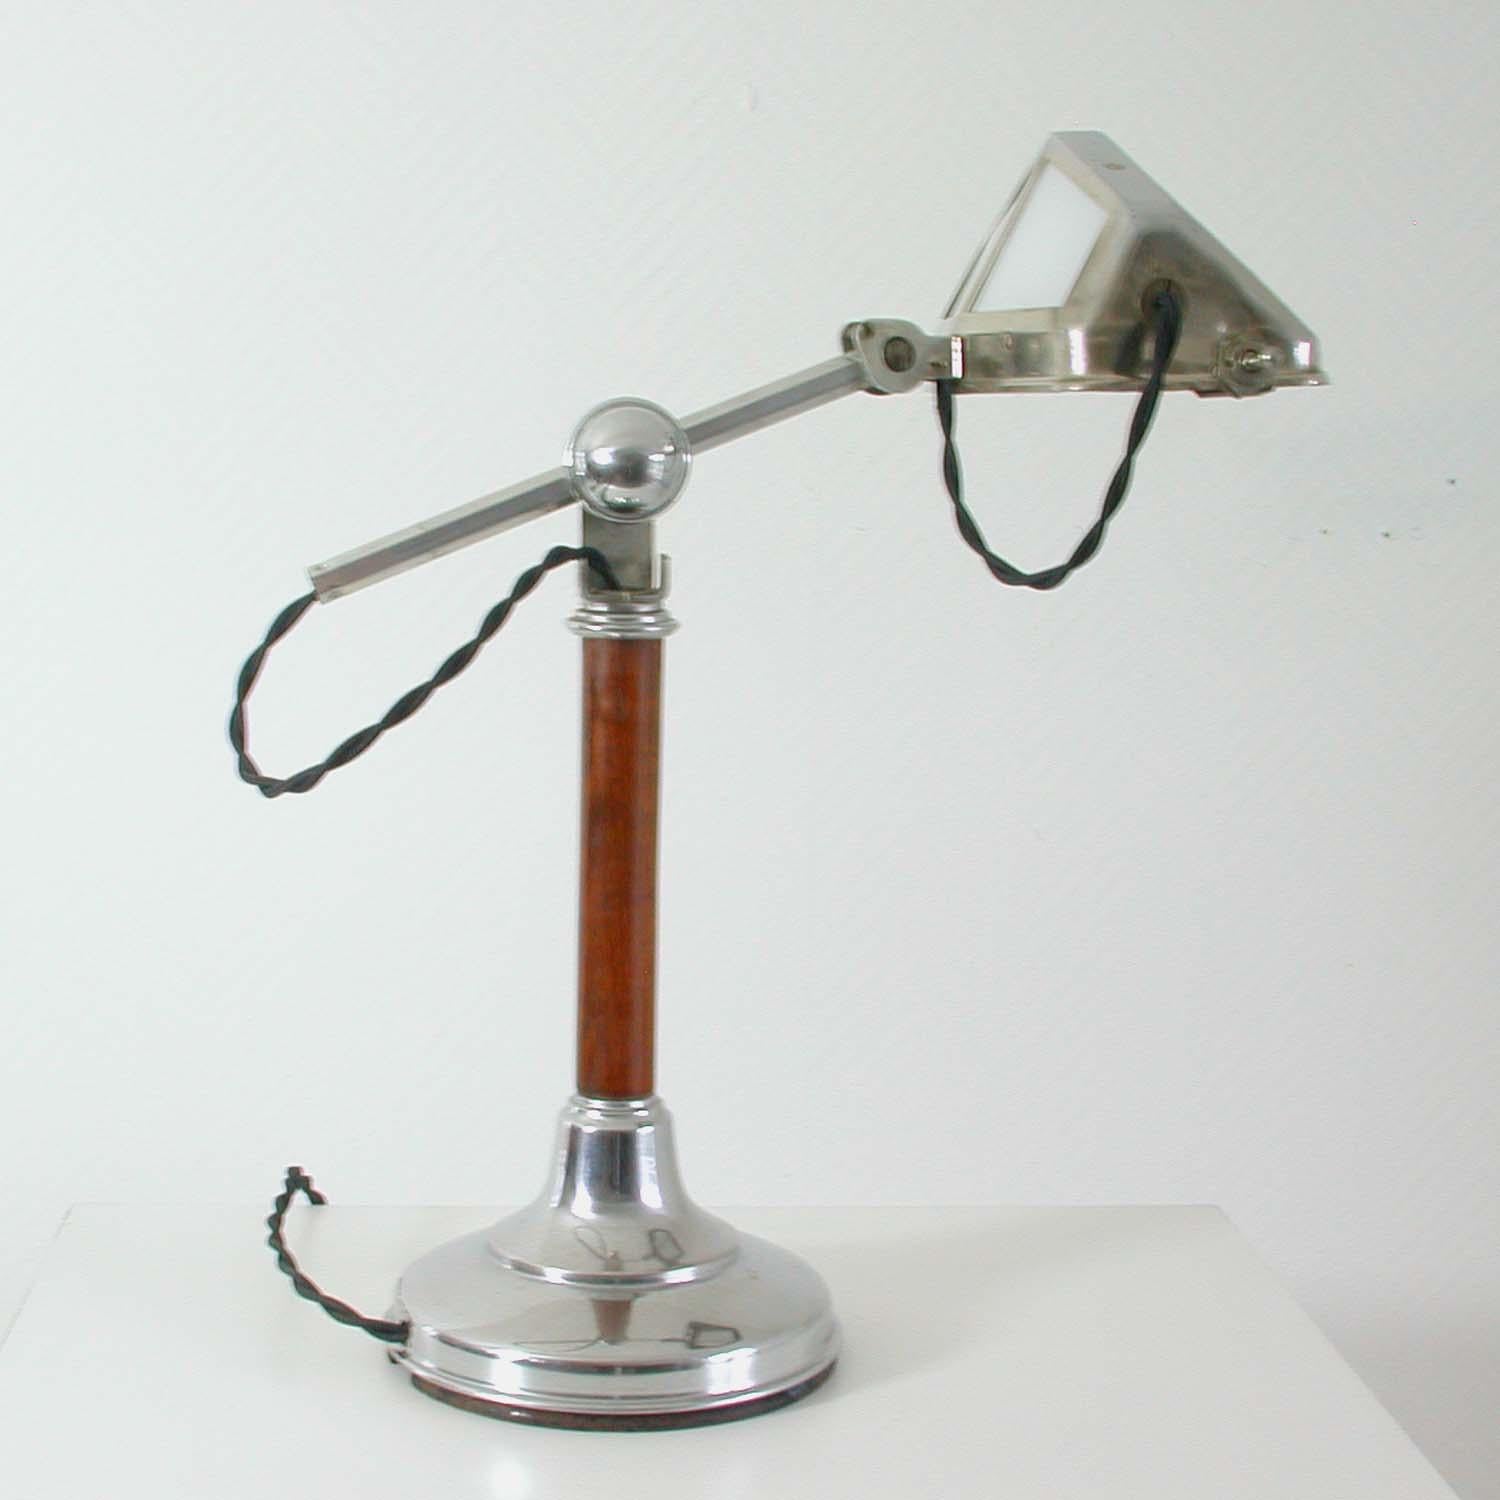 Plated 1920s French Art Deco Pirouette Chrome Wood and Glass Table Lamp